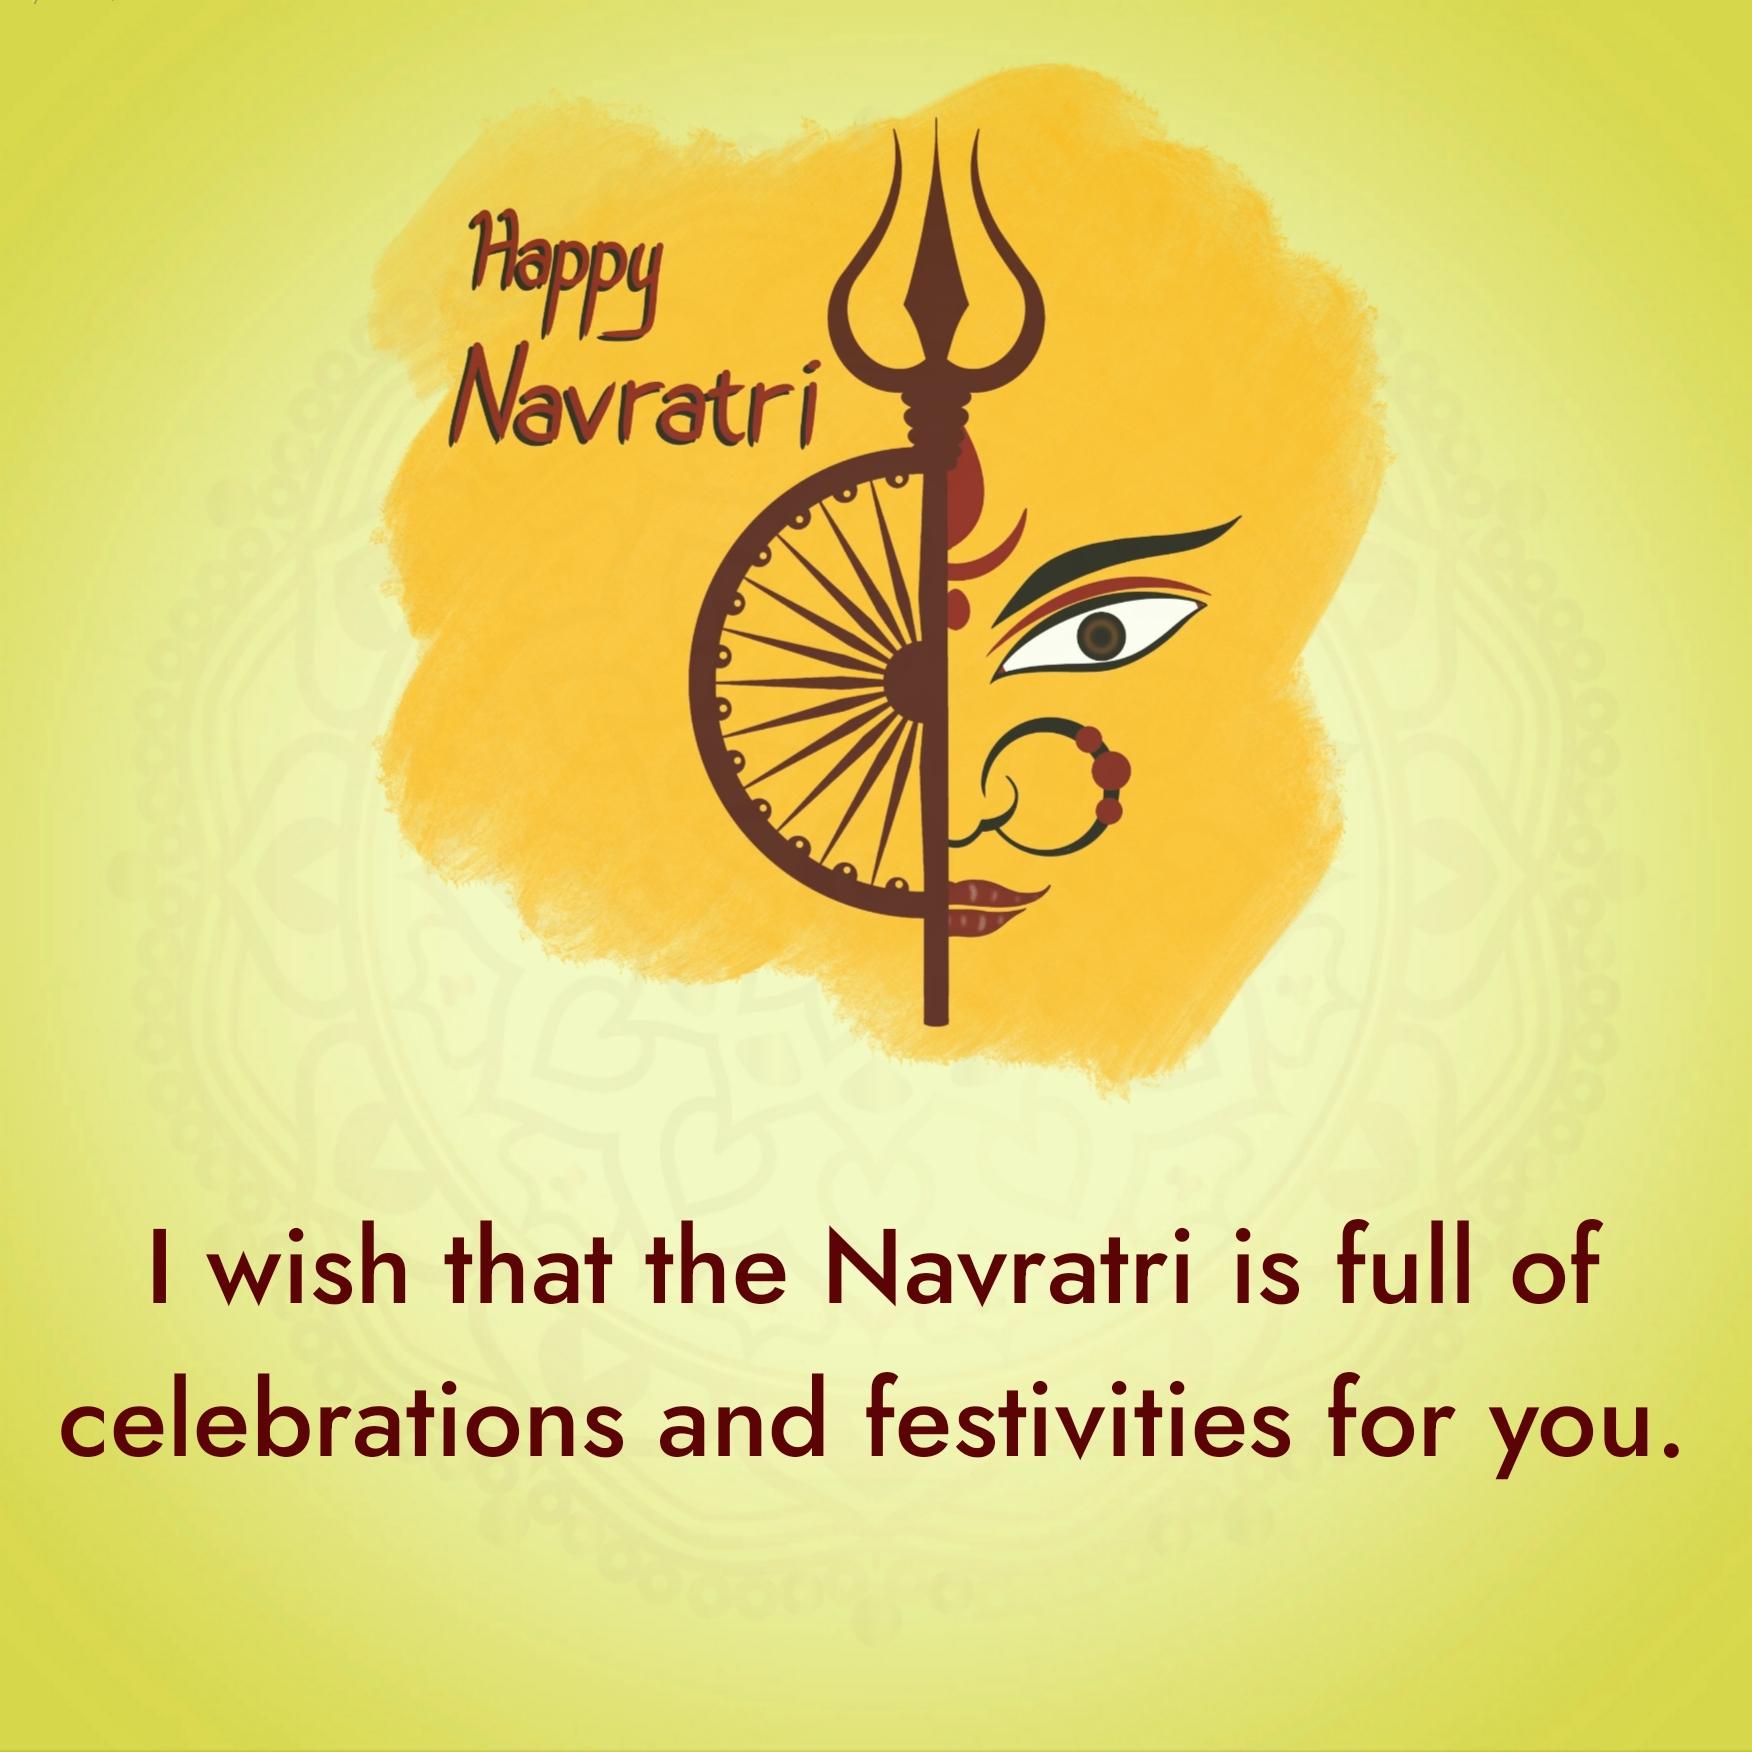 I wish that the Navratri is full of celebrations and festivities